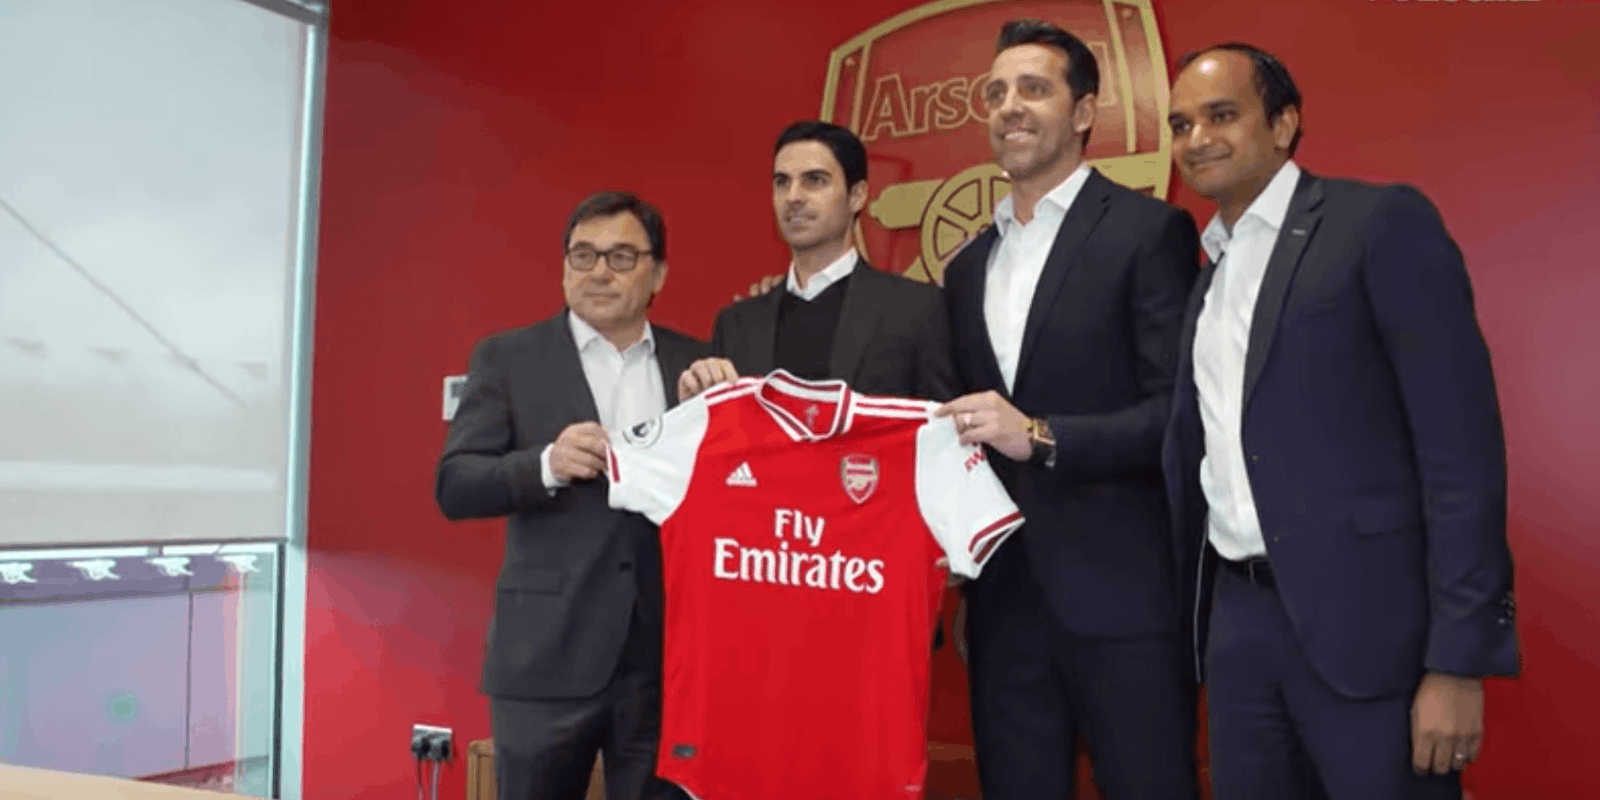 Mikel Arteta's unveiling as Arsenal manager